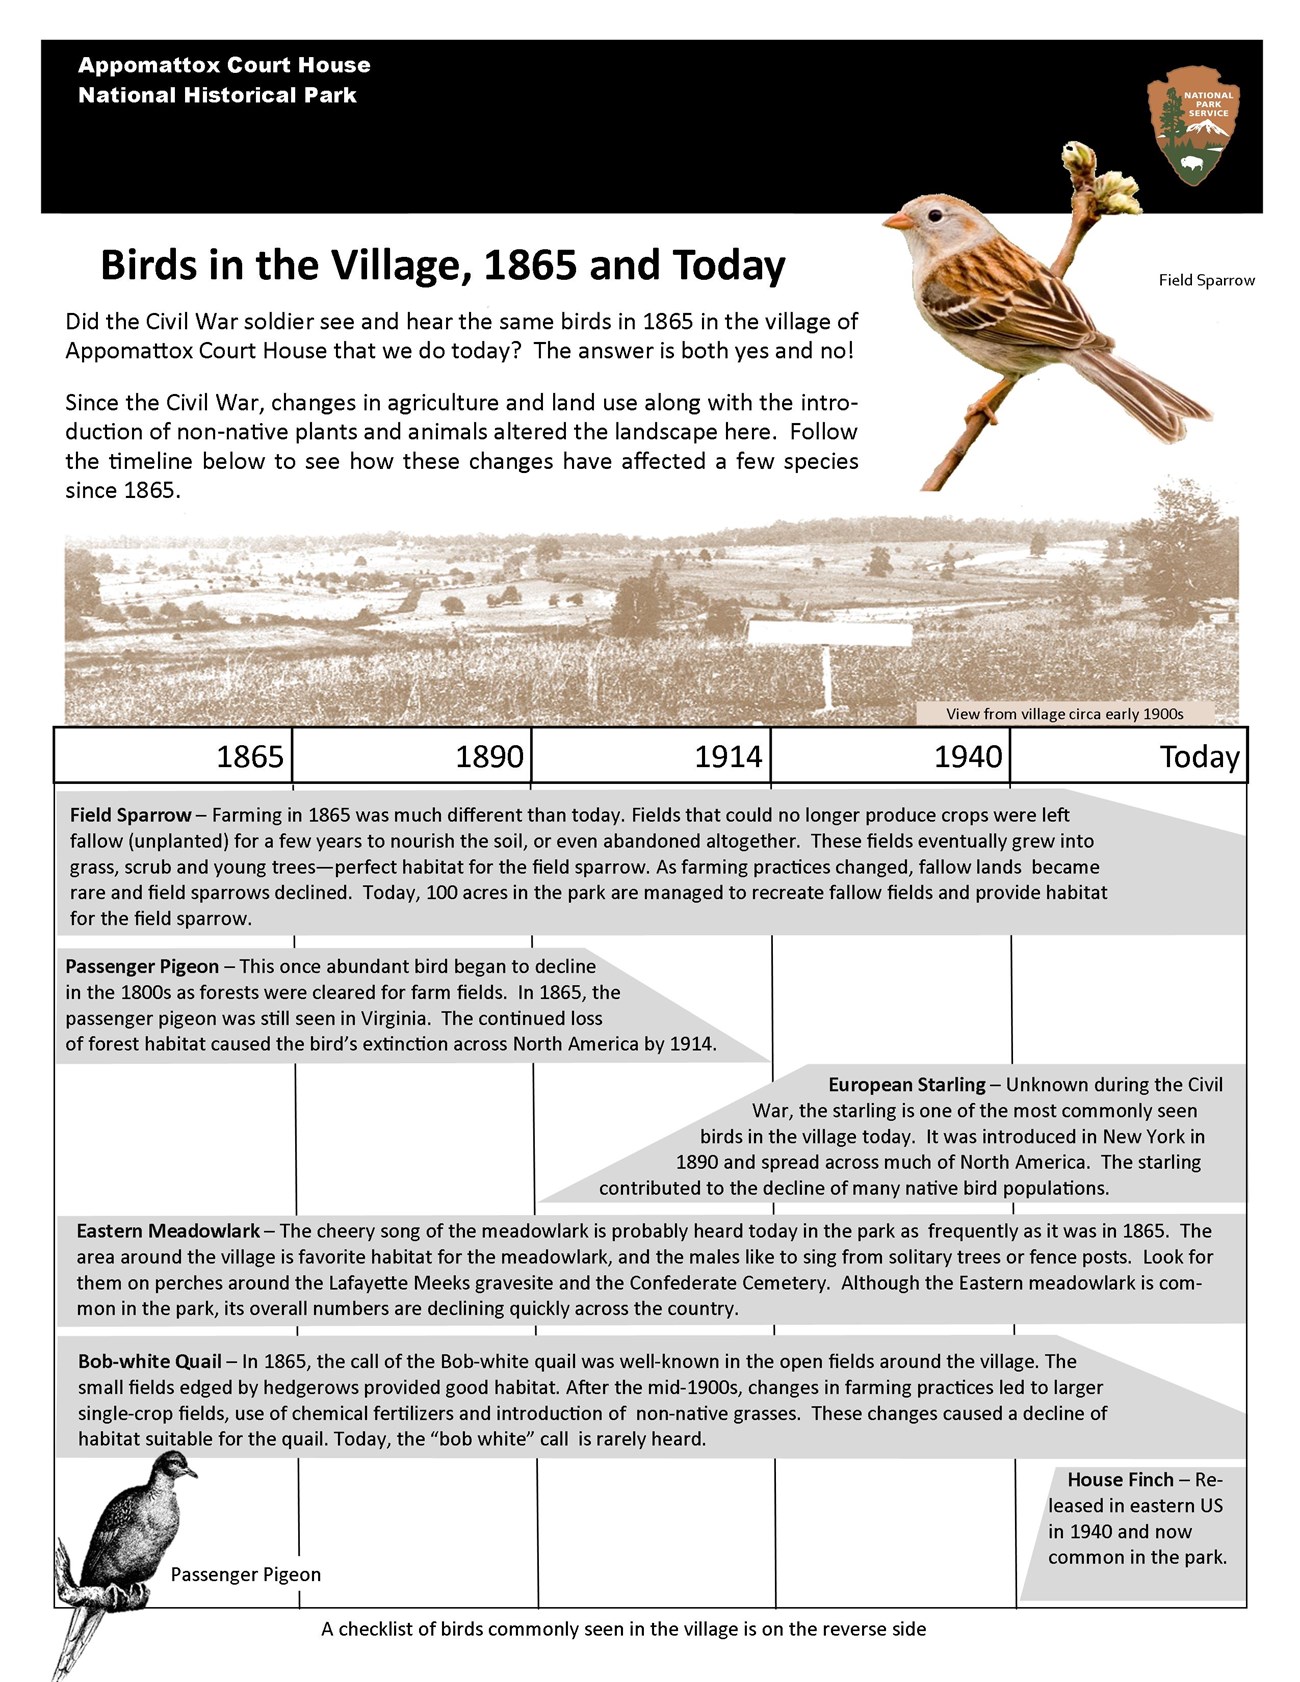 Description of birds in the park between 1865 and today.